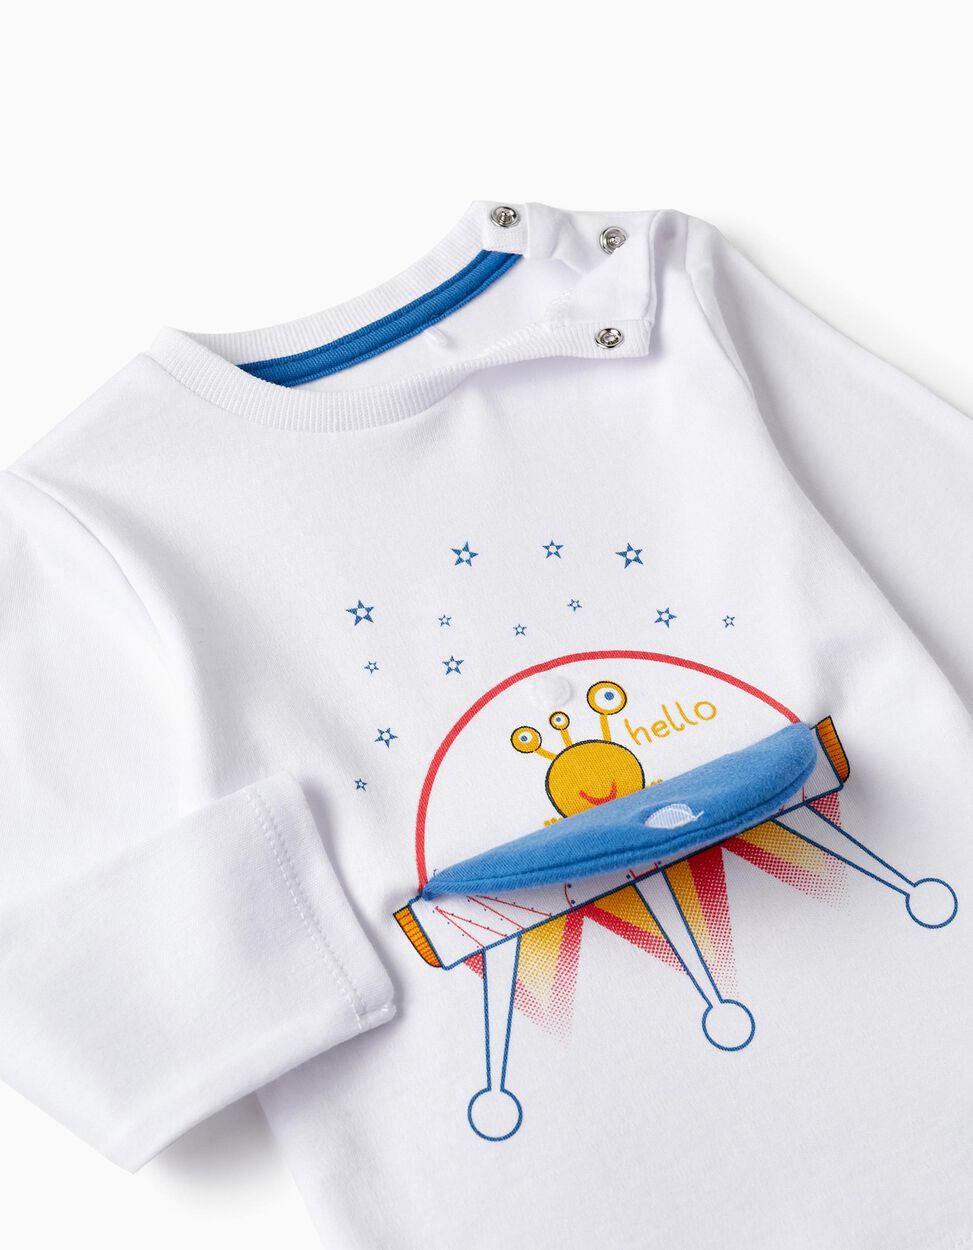 Buy Online Cotton Pyjamas with 3D Effect for Baby Boys 'Spaceship', White/Blue